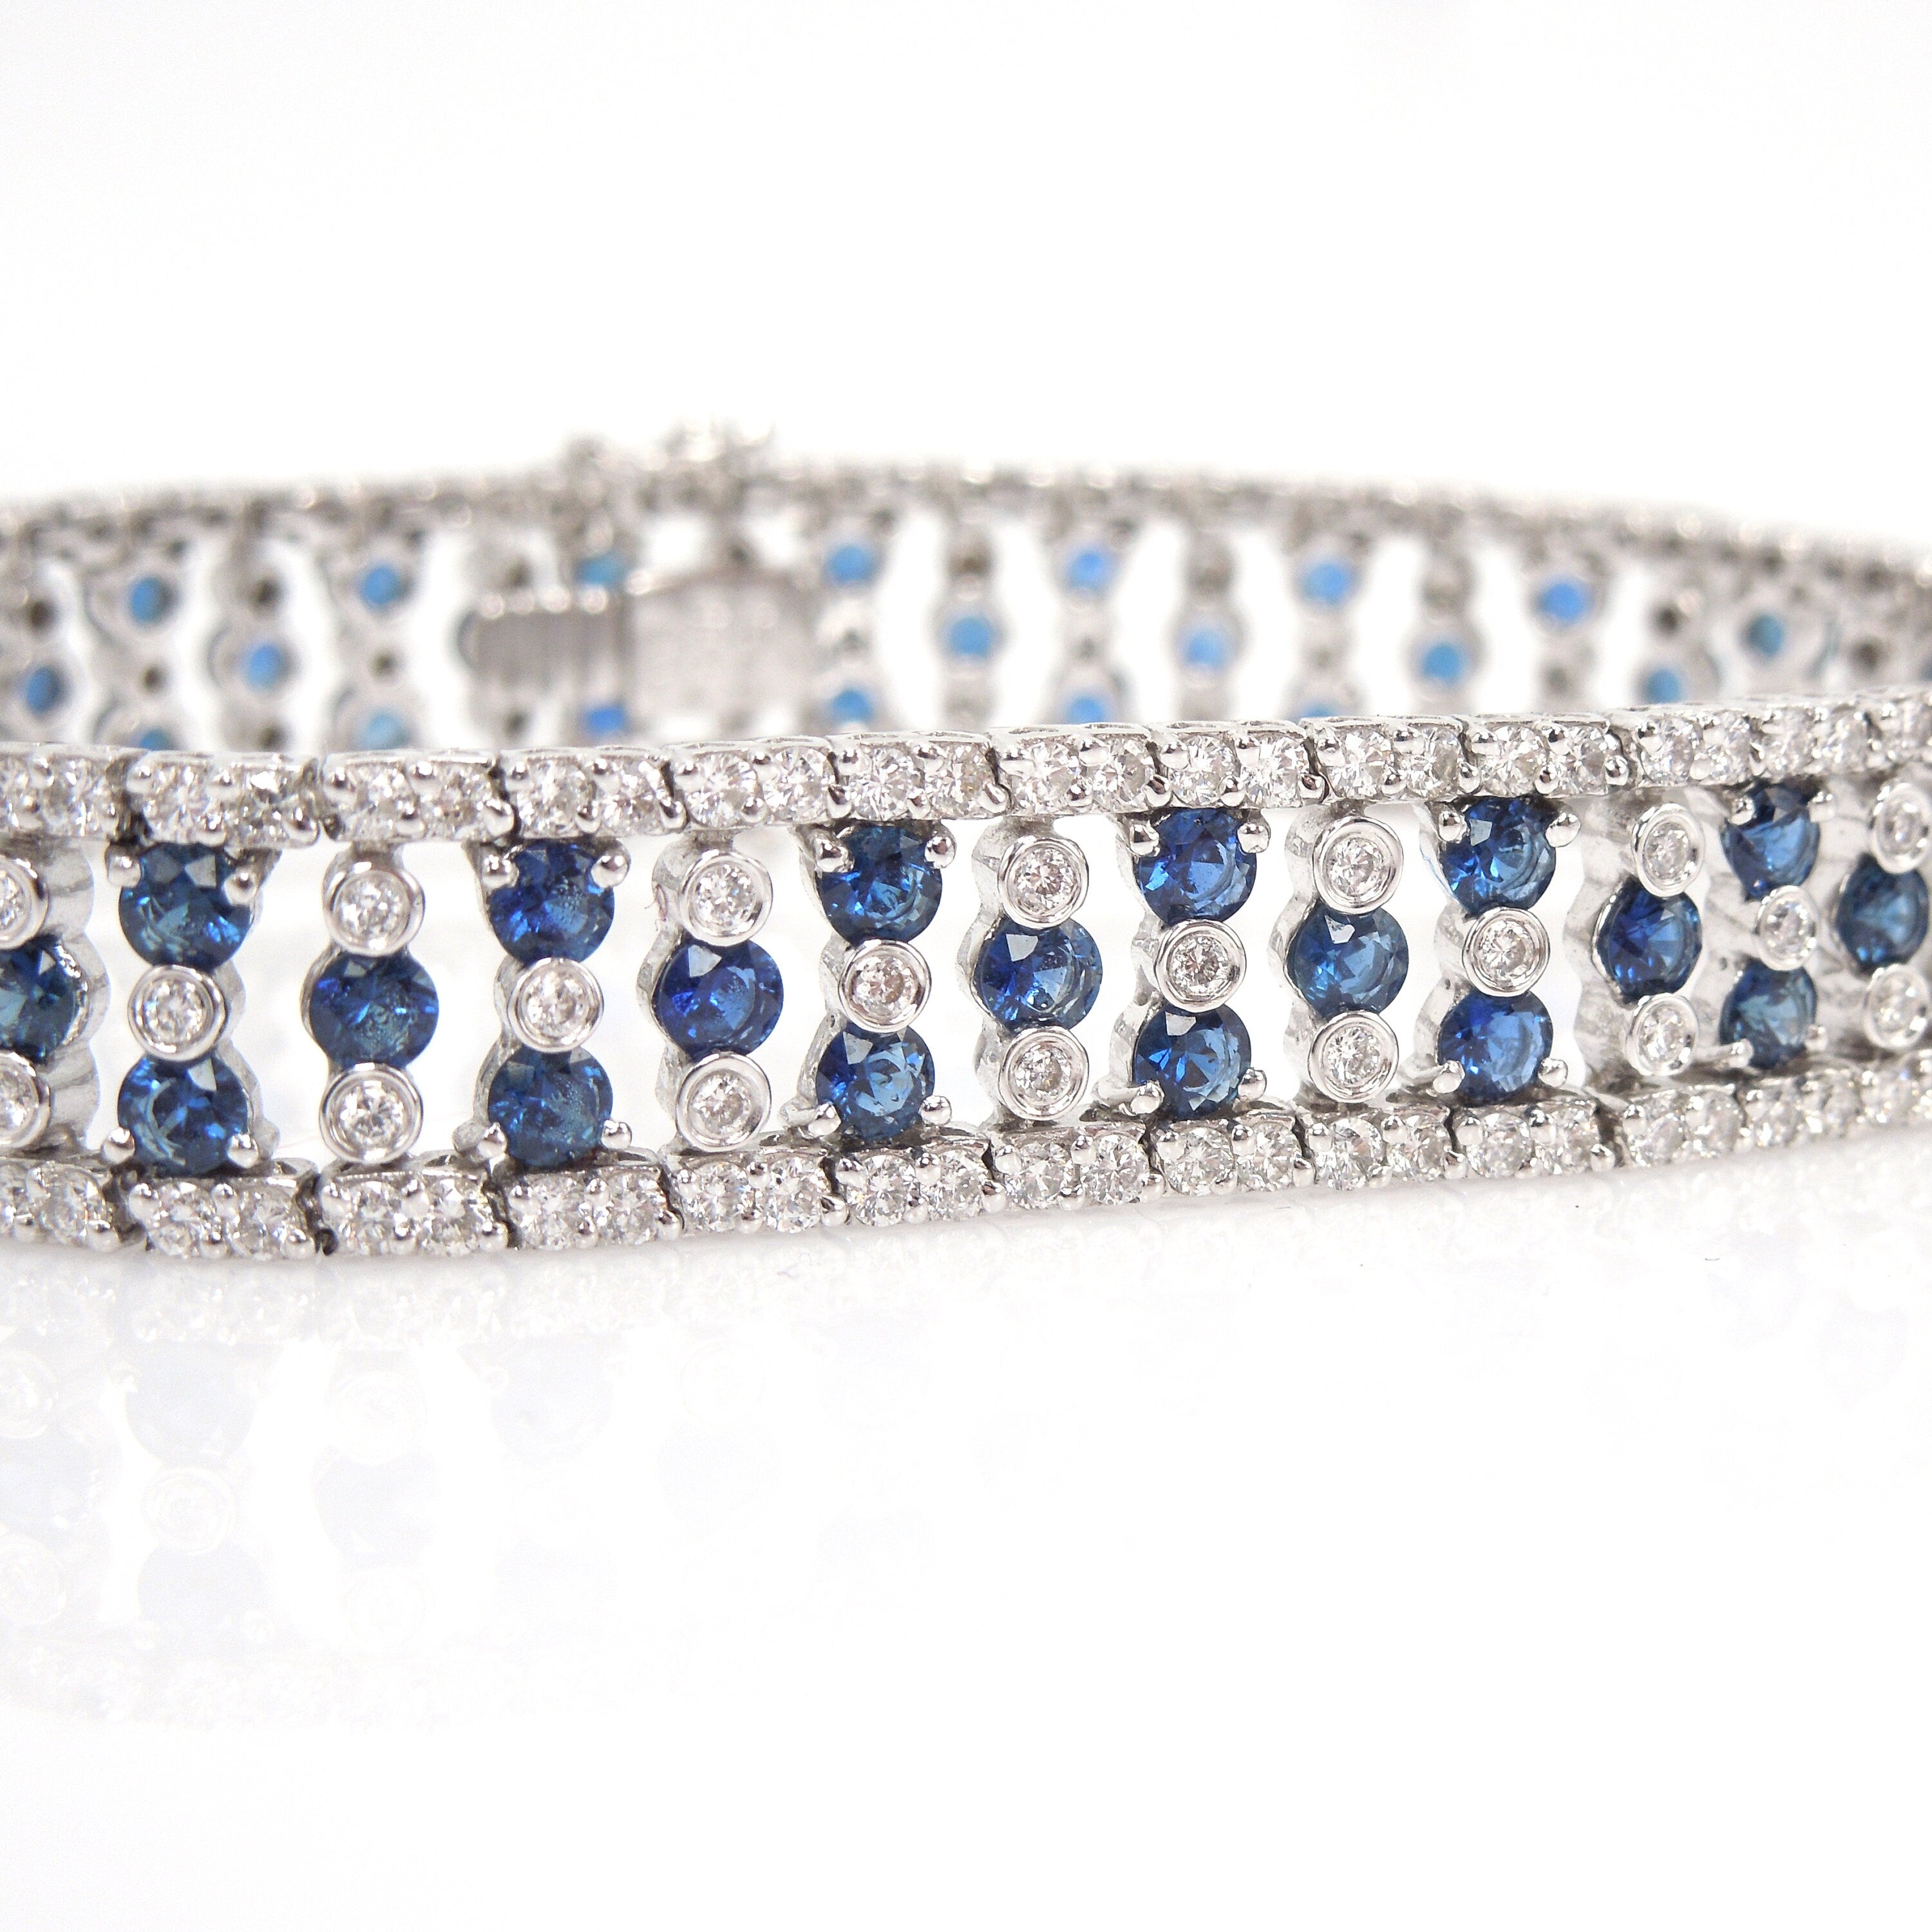 Vintage Wide Gregg Ruth Diamond and Sapphire Bracelet in 18K White Gold